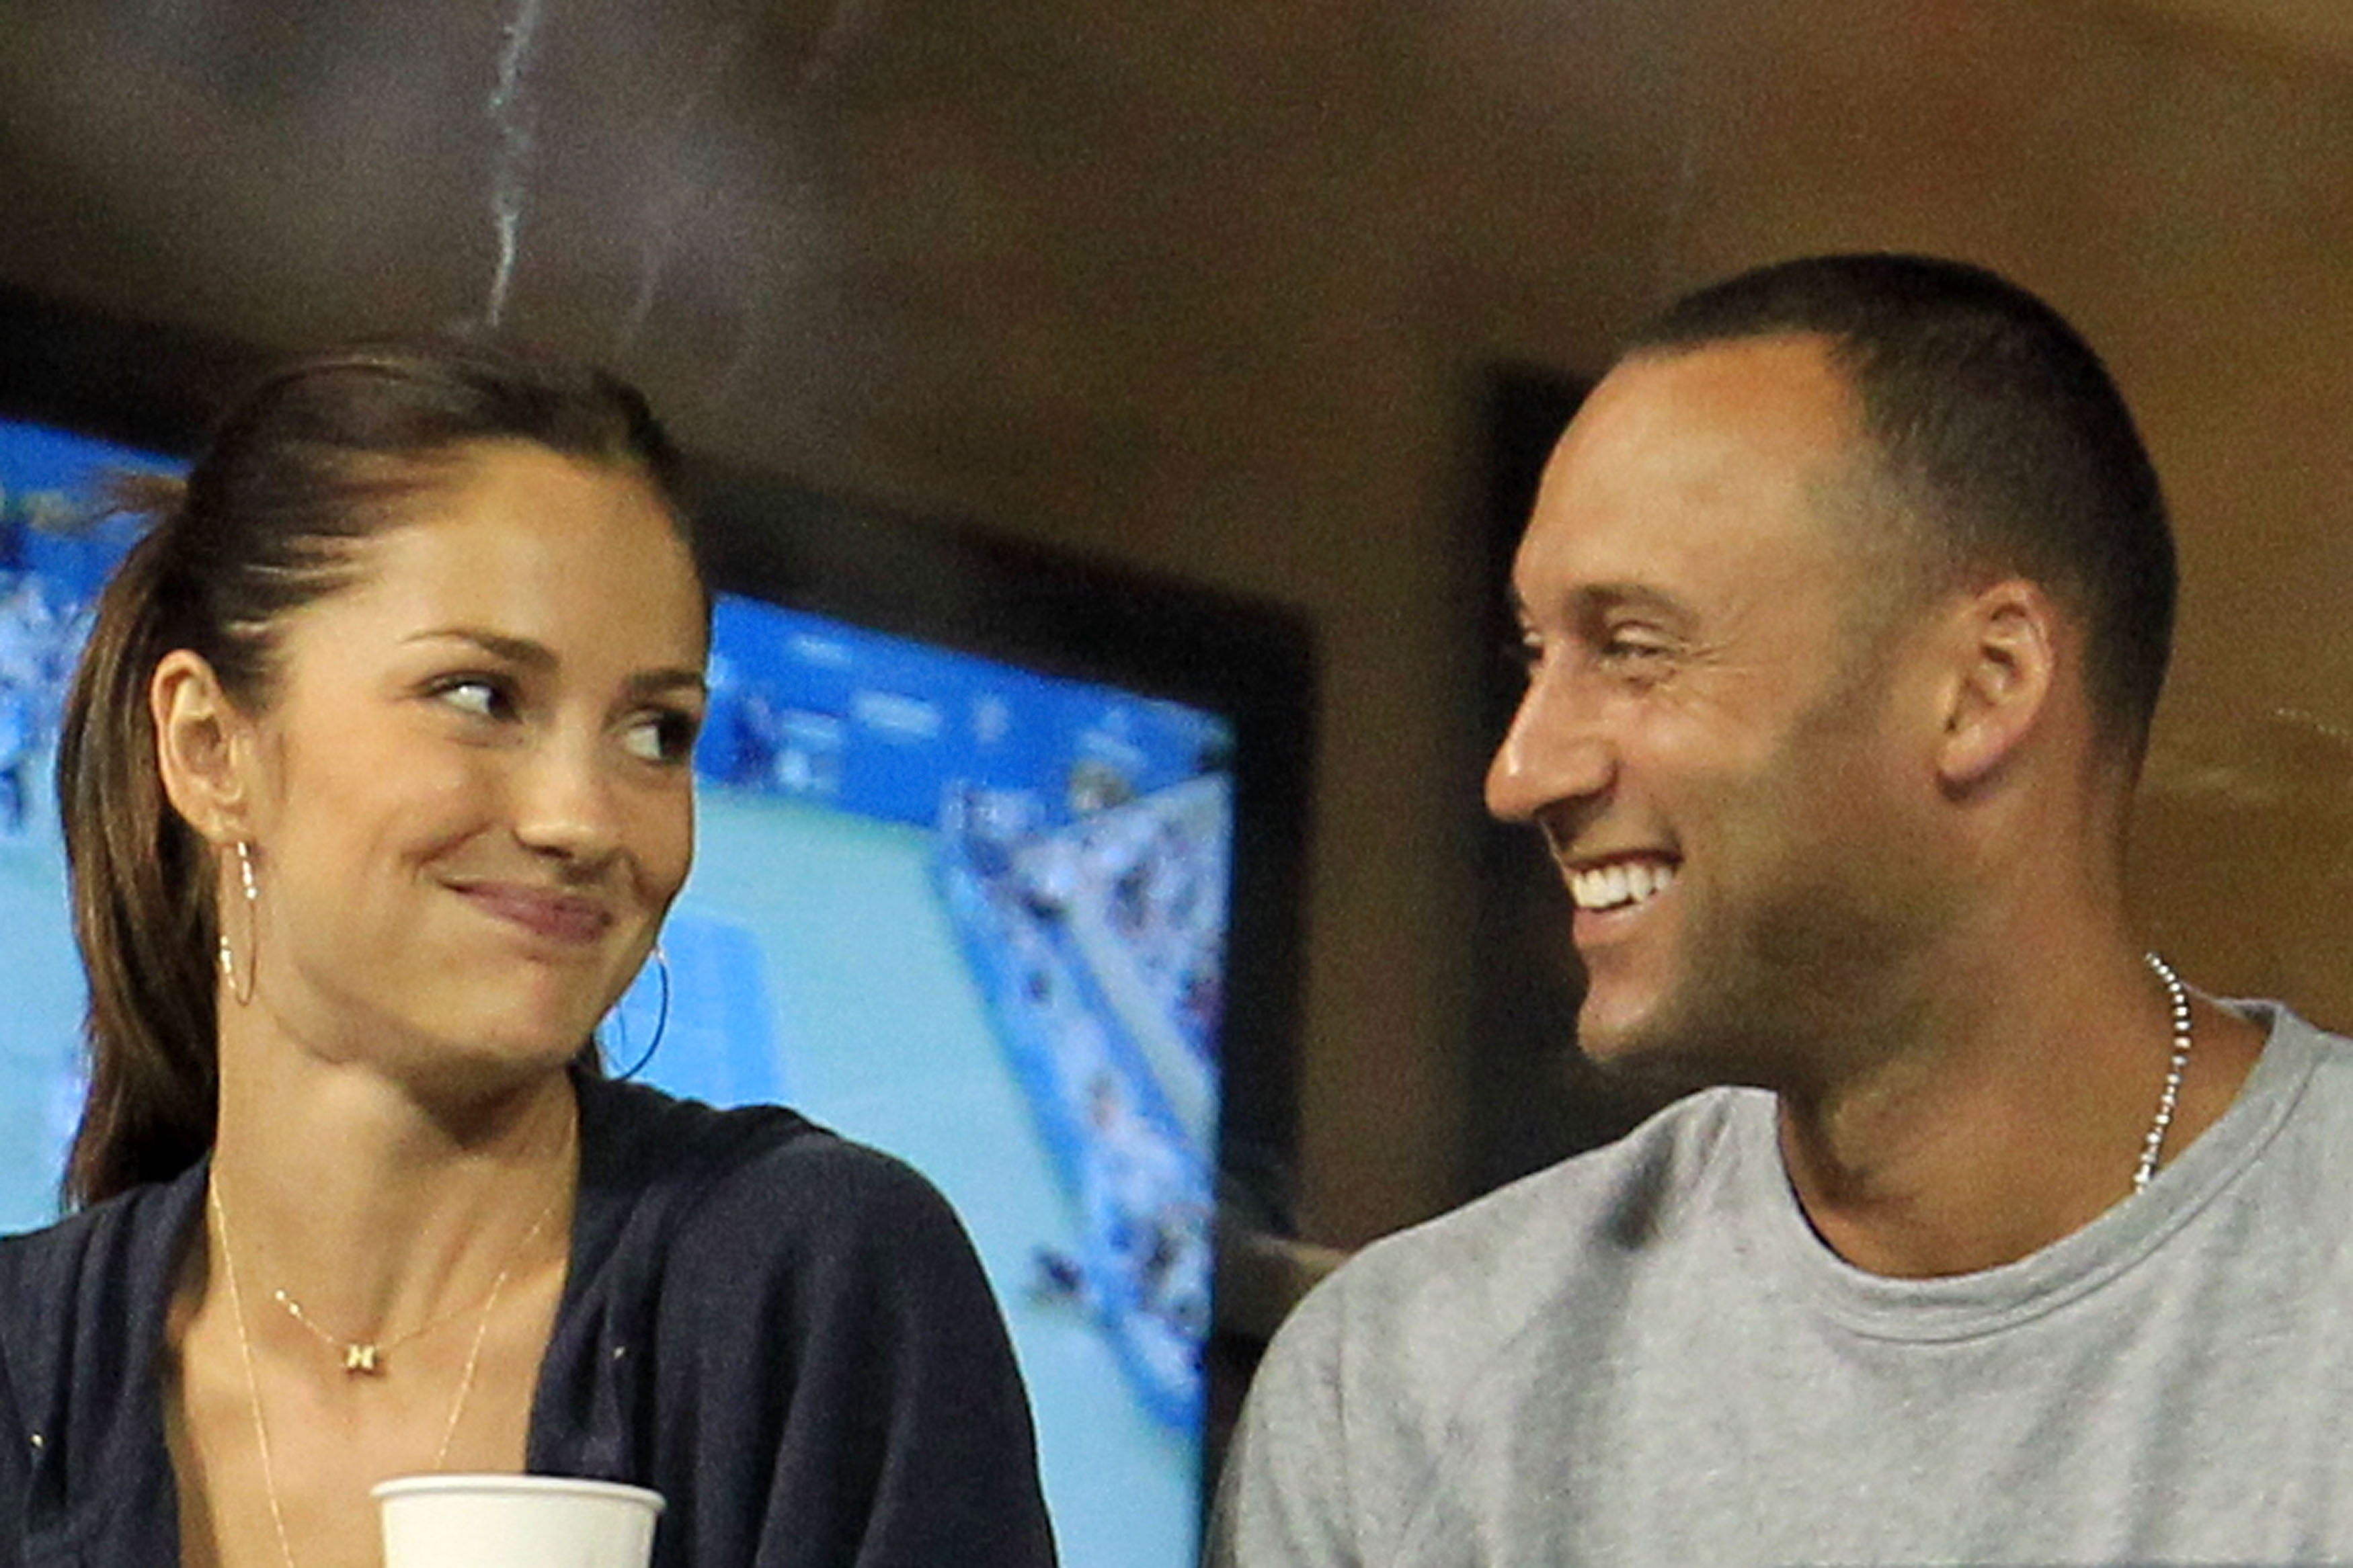 Actress Minka Kelly and Derek Jeter at the USTA Billie Jean King National Tennis Center on September 4, 2010, in New York | Source: Getty Images